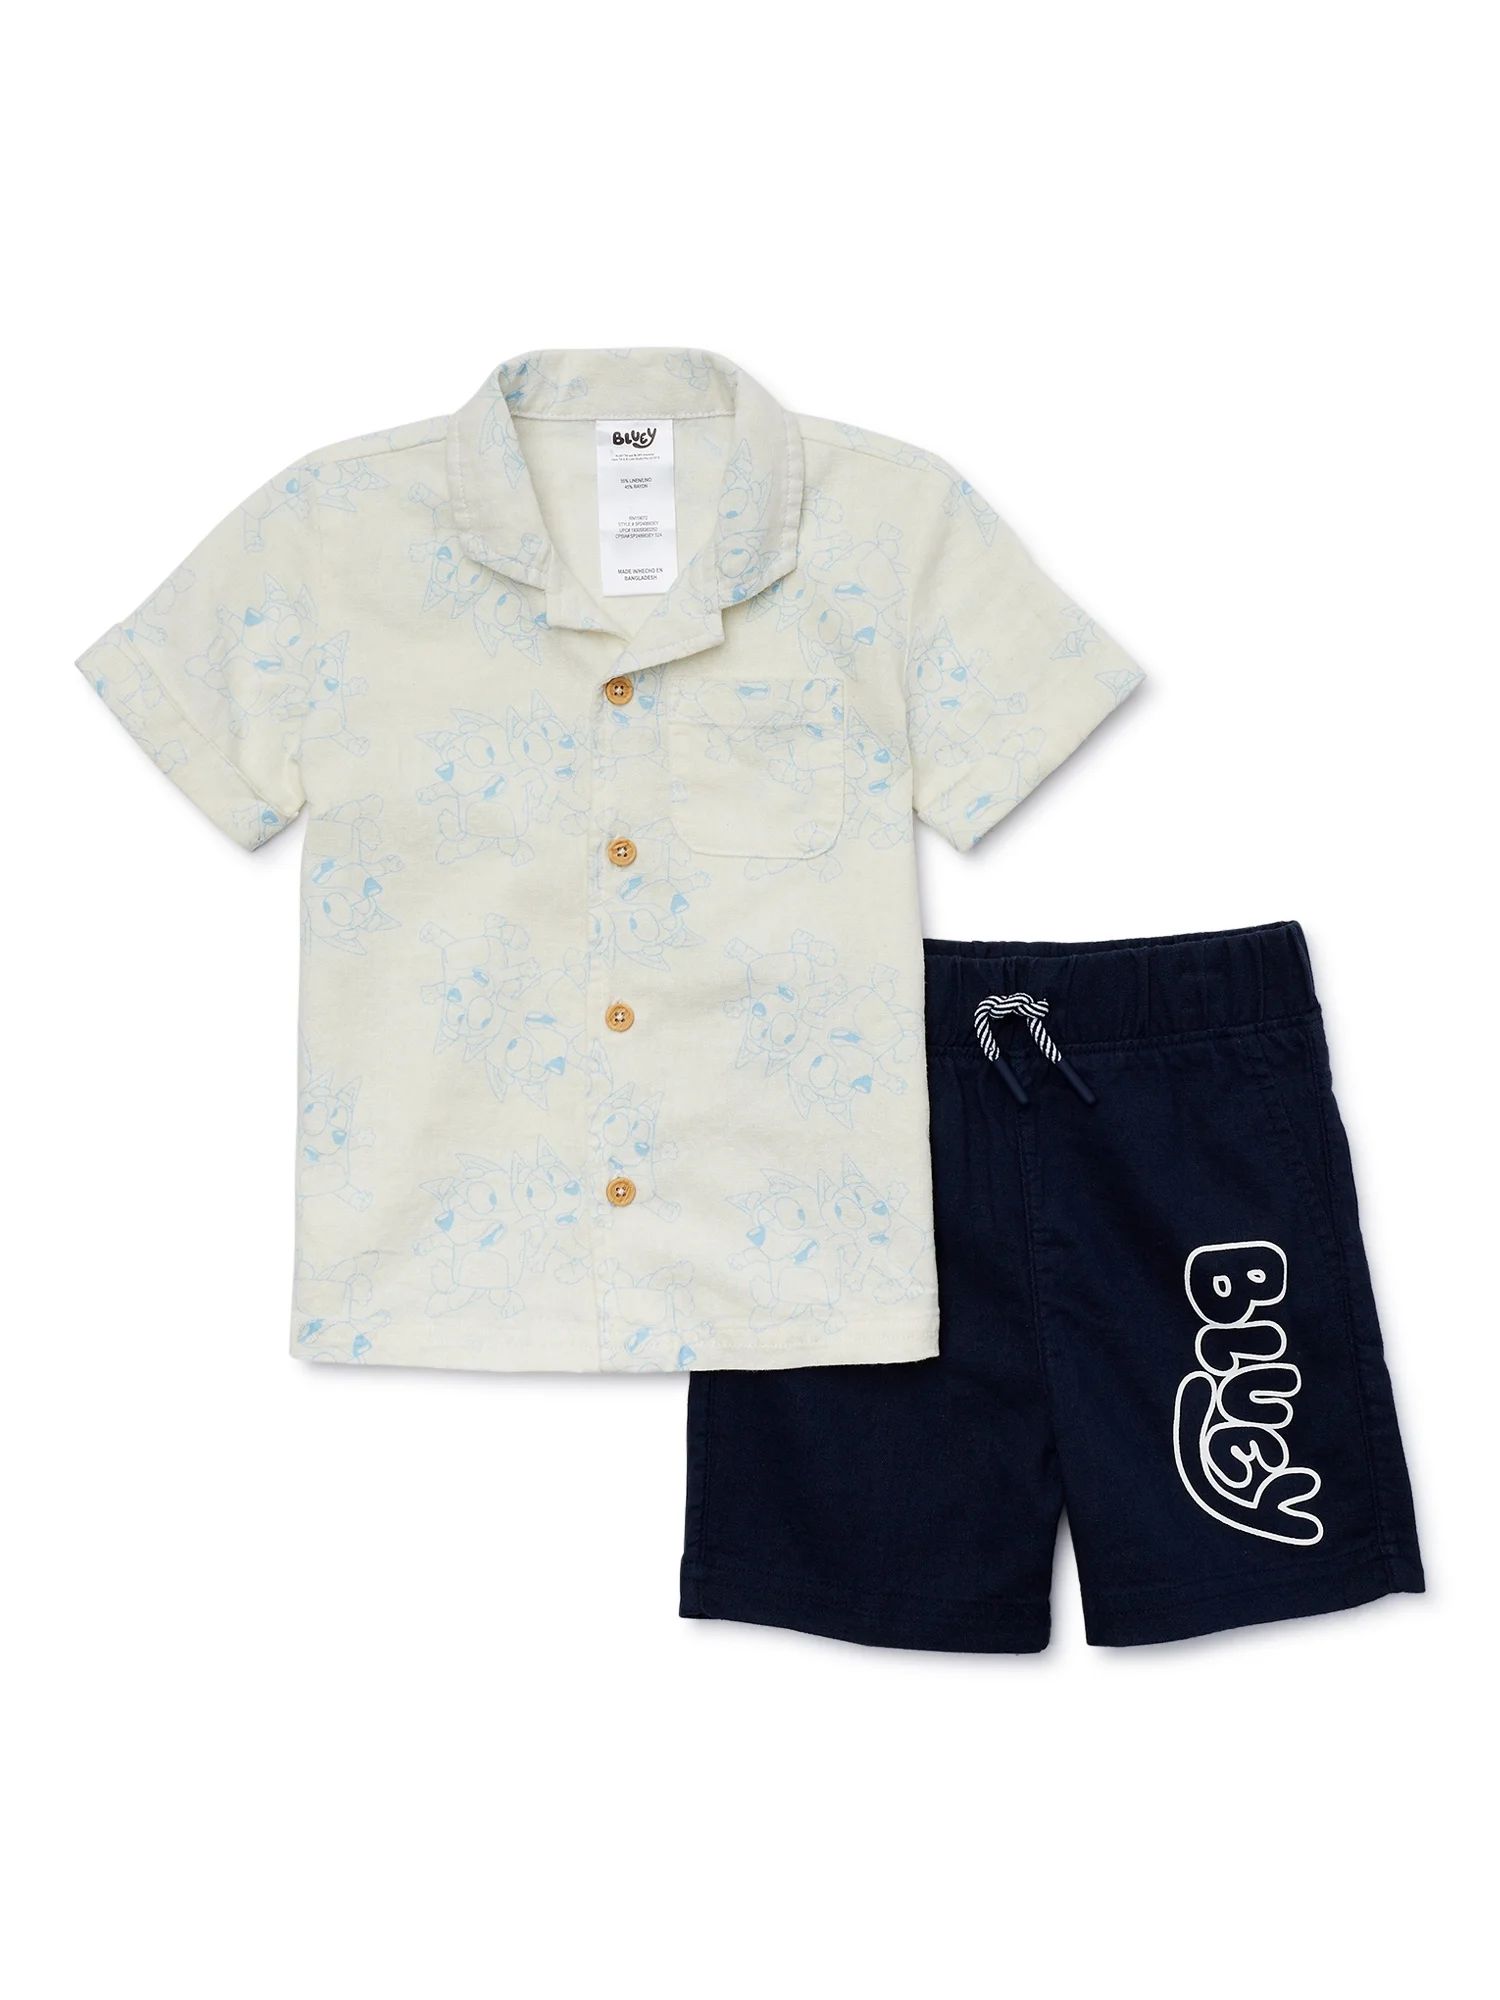 Bluey Toddler Boys Button Front Top and Shorts Set, 2-Piece, Sizes 2T-5T | Walmart (US)